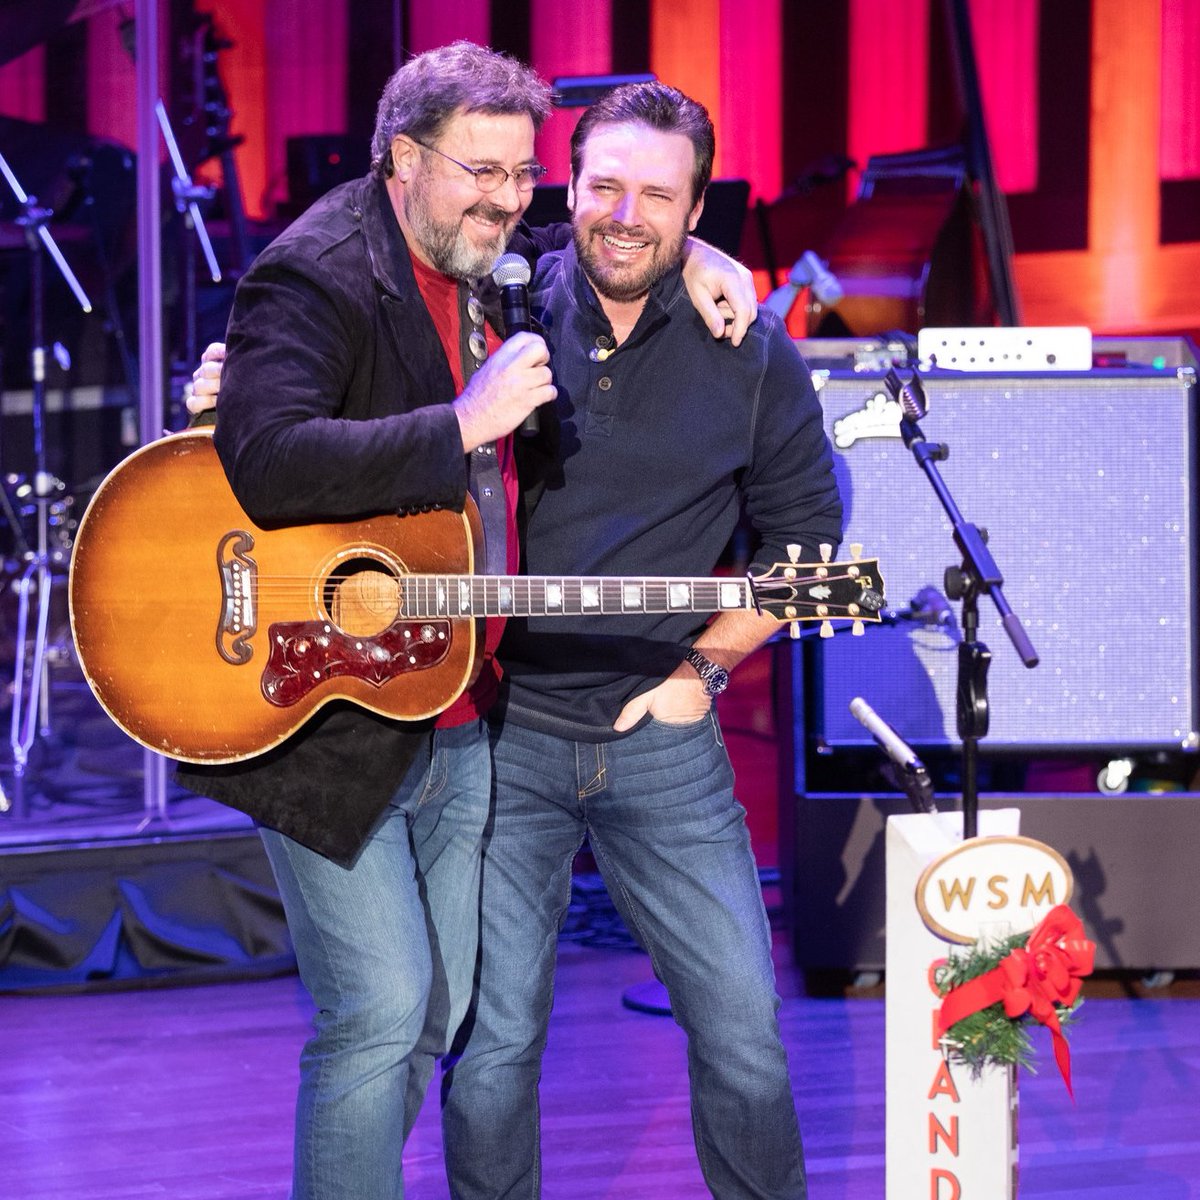 5 years ago, today, @MarkWillsMusic heard the words 'We want to invite you to become the newest member of the Opry' from none other than @VGcom. Happy Opry invite Anniversary, Mark! ♥️